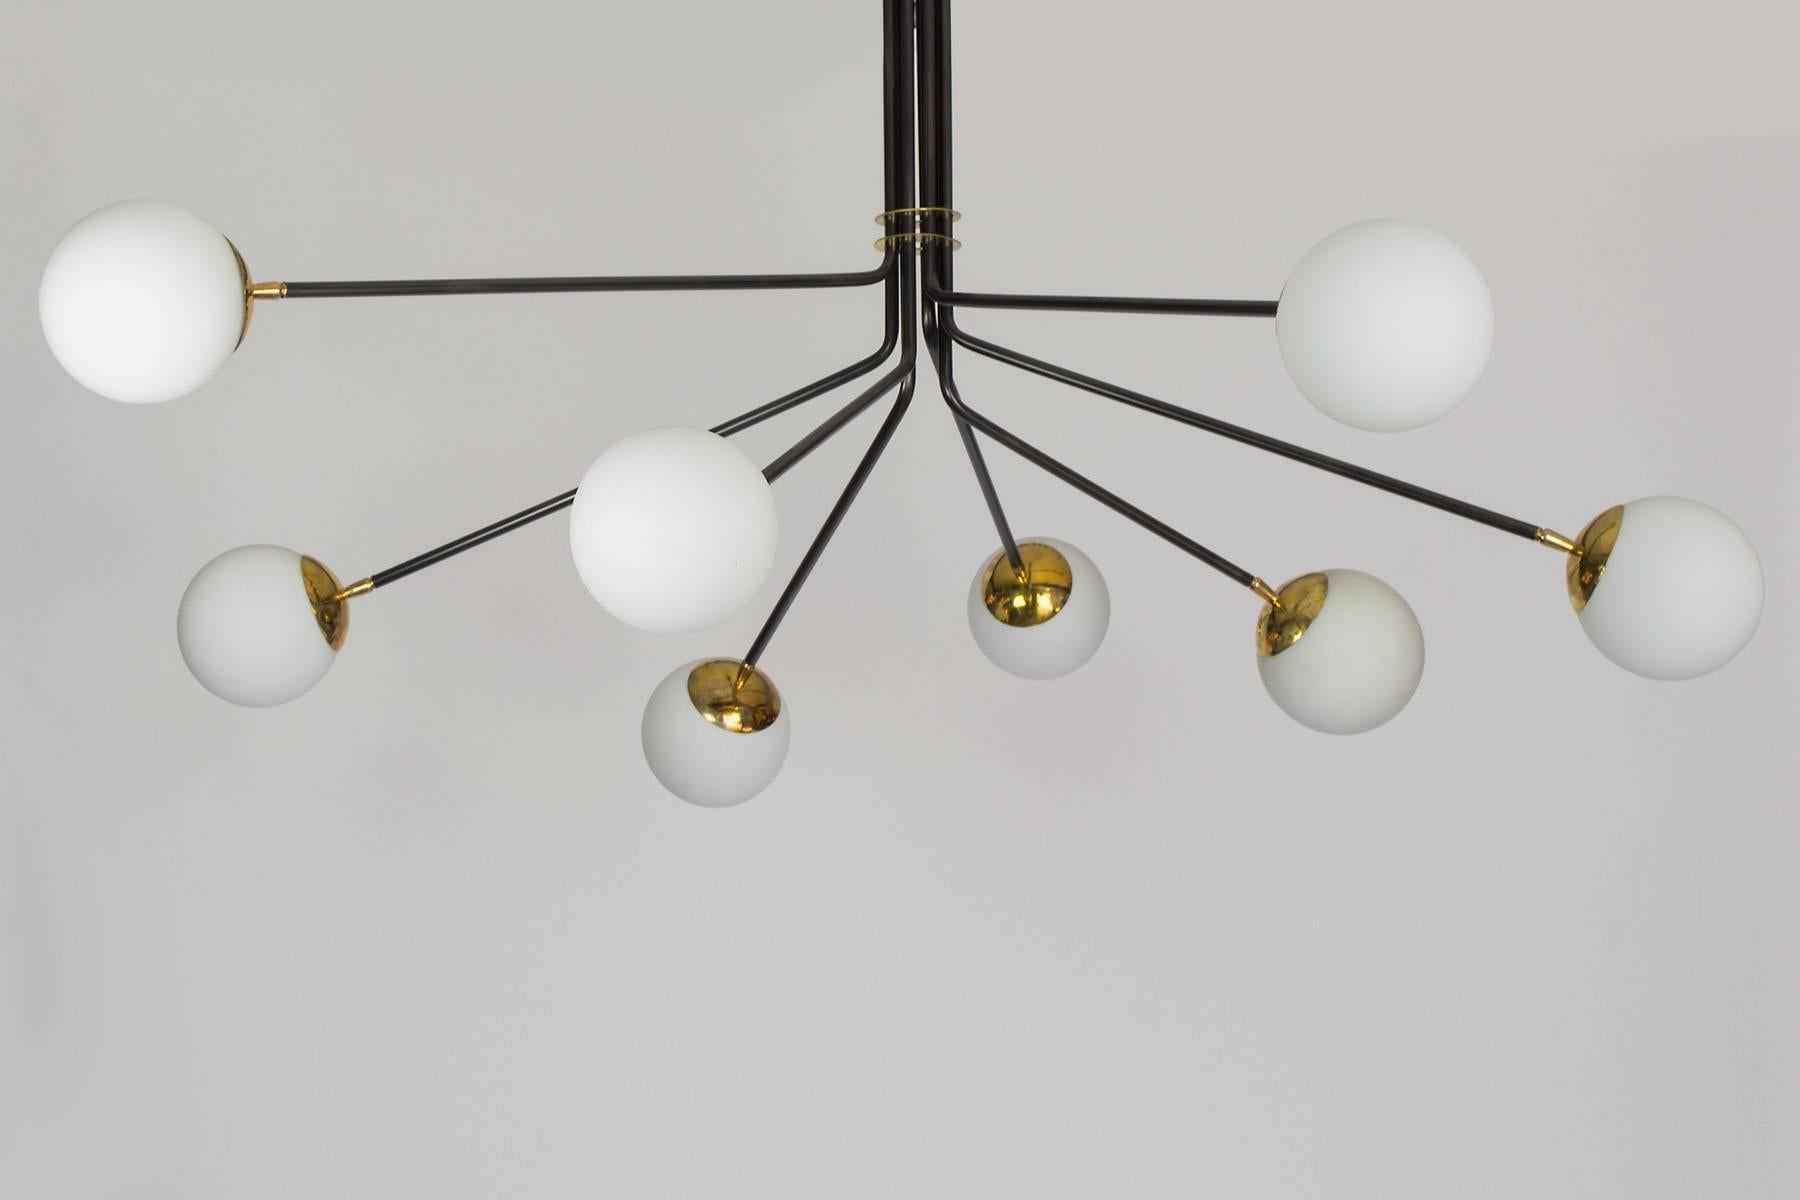 This chandelier combines brass, opaline glass and black enamel to create a wonderful Mid-Century inspired chandelier. The eight lights provide a lot of light, it is a large-scale chandelier which will work nicely in an entry or a dining room. The